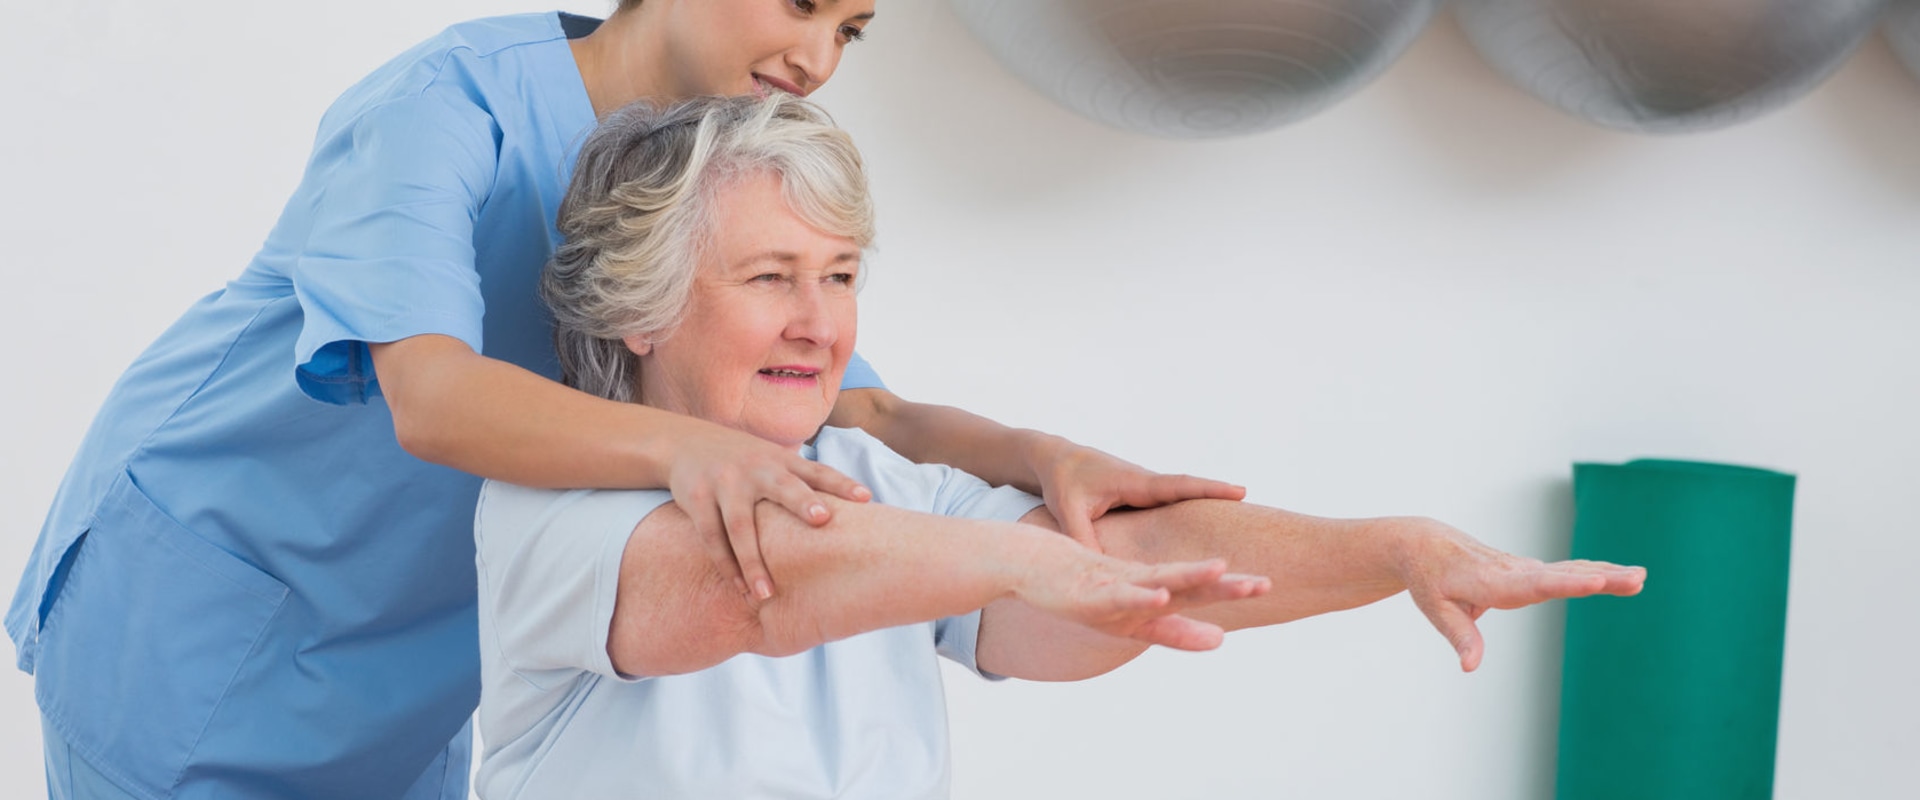 Can Physical Therapy Make Pain Worse? An Expert's Perspective